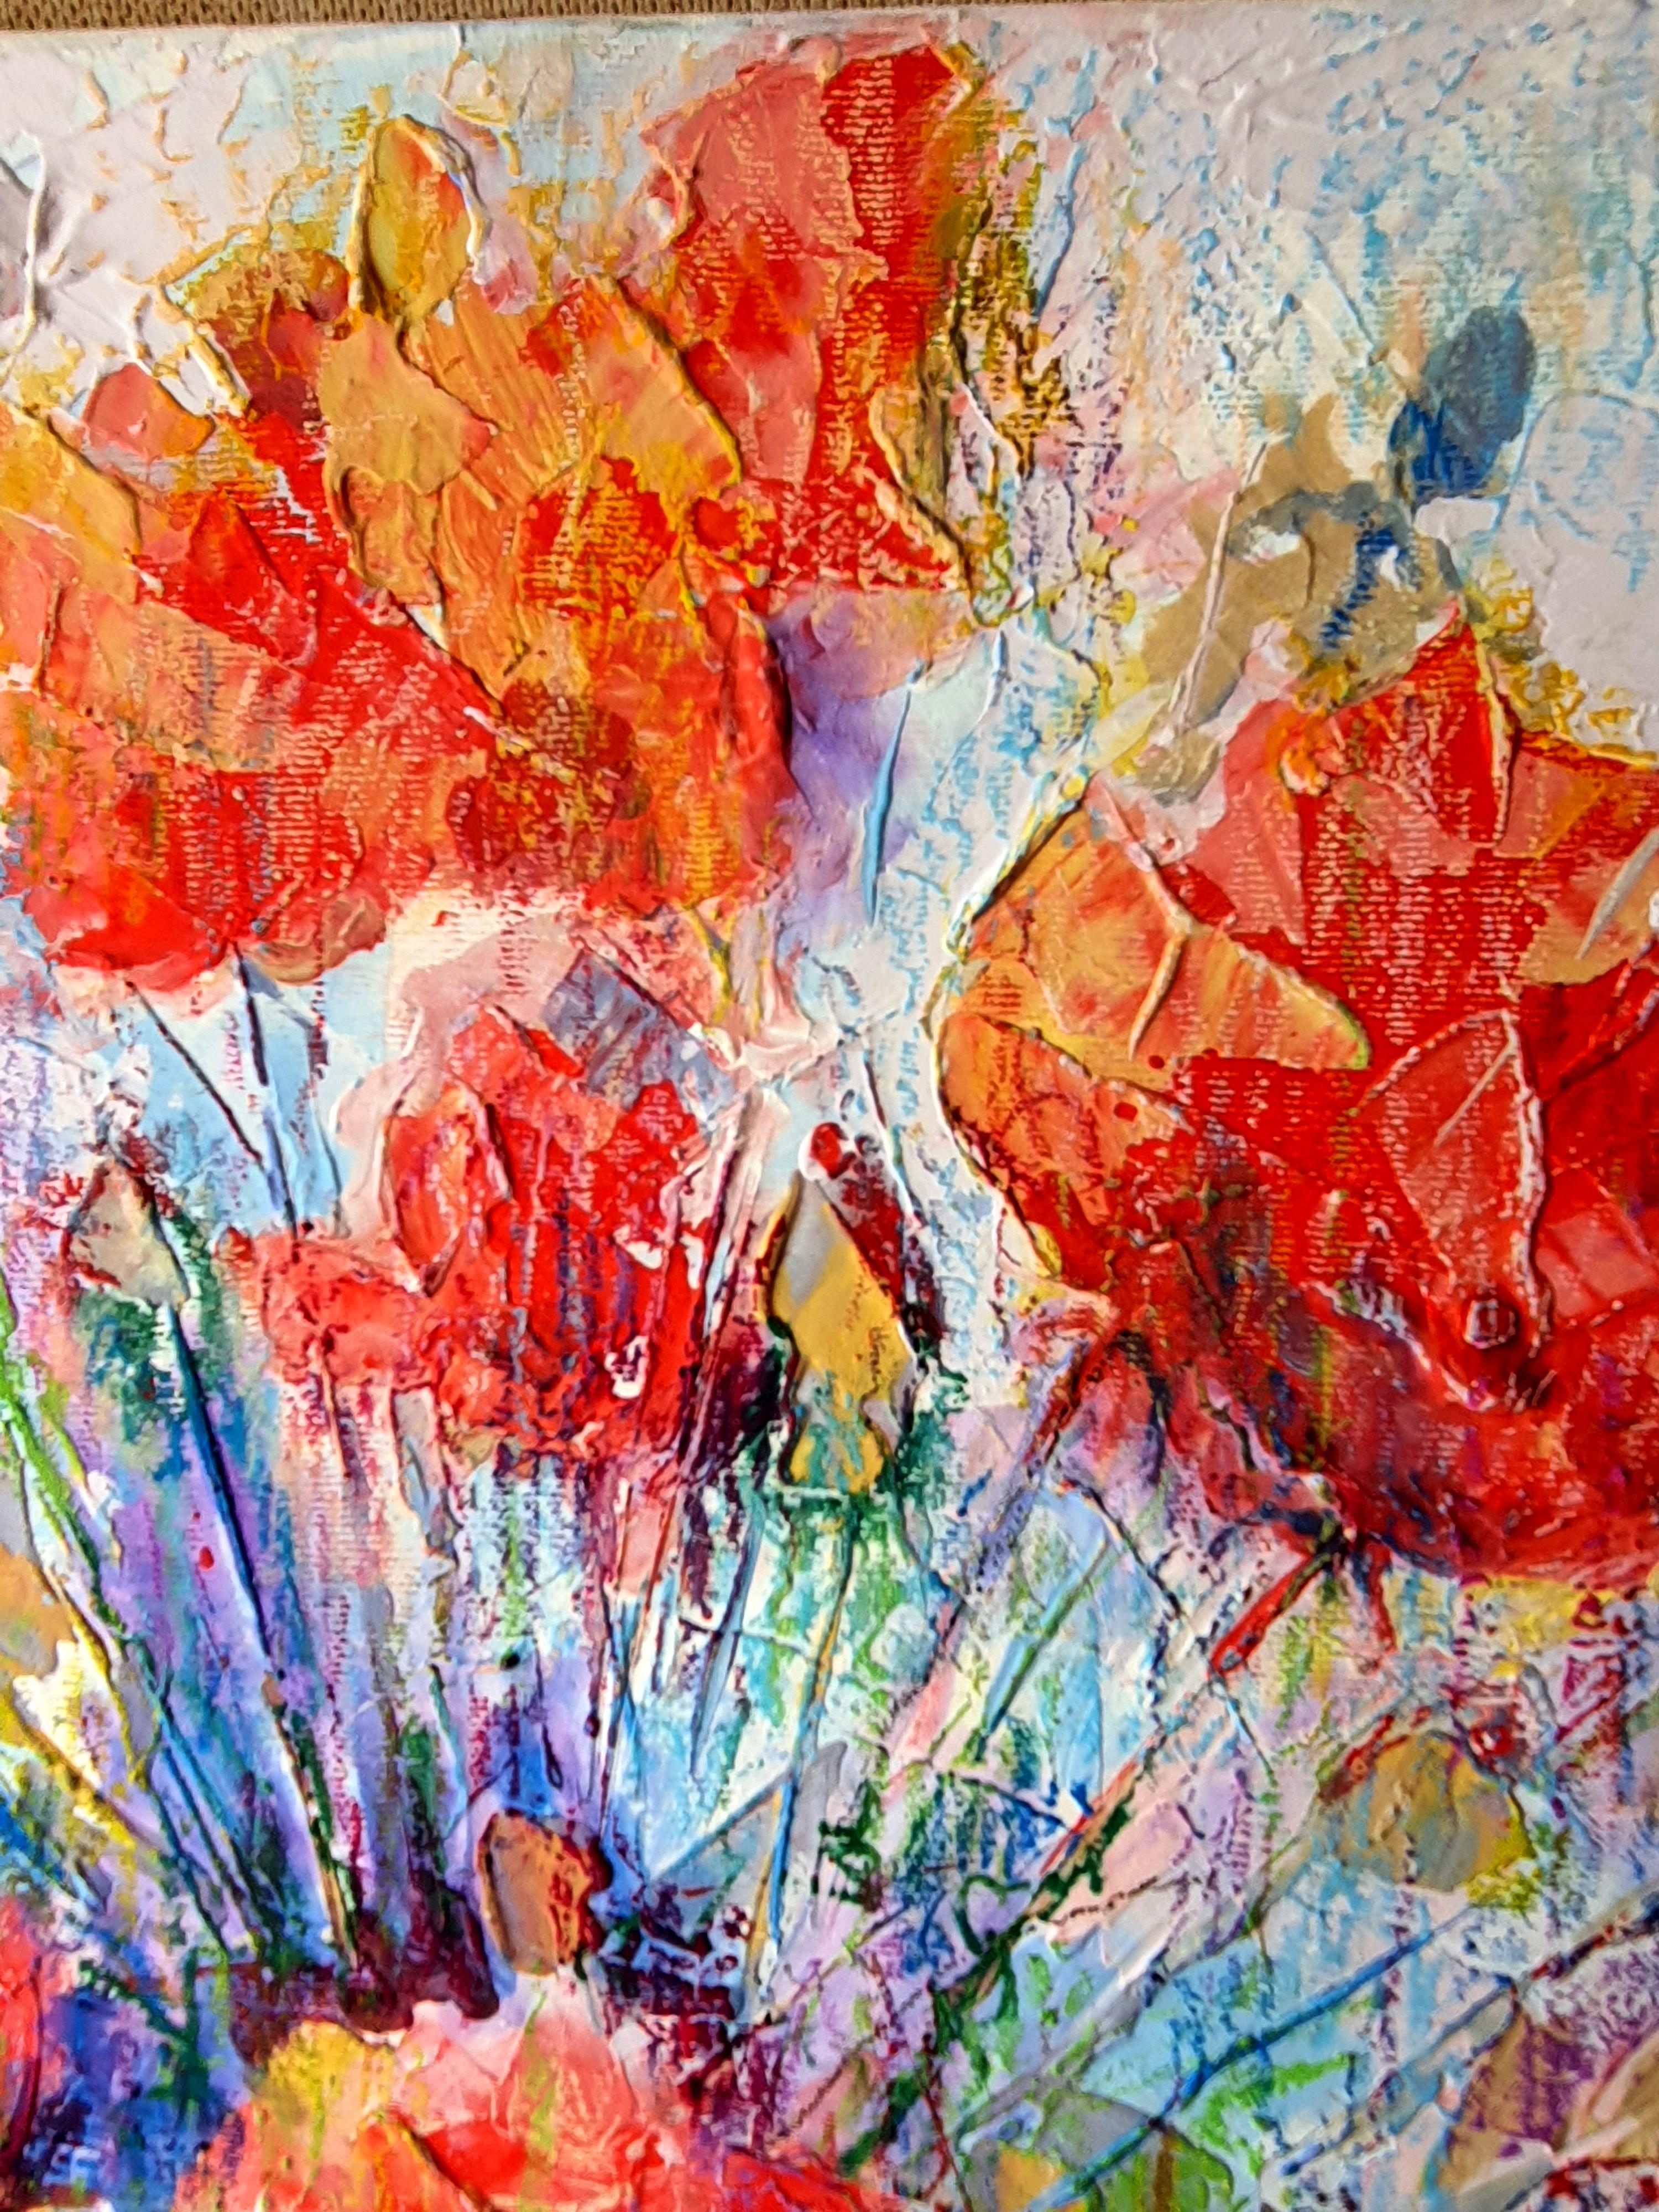 In this vibrant fusion of acrylic, oil, and oil pastel, I've unleashed an emotional symphony, capturing the raw beauty of blooms through an impressionist's heart and an expressionist's spirit. The energetic strokes and hues embody life's zest, each